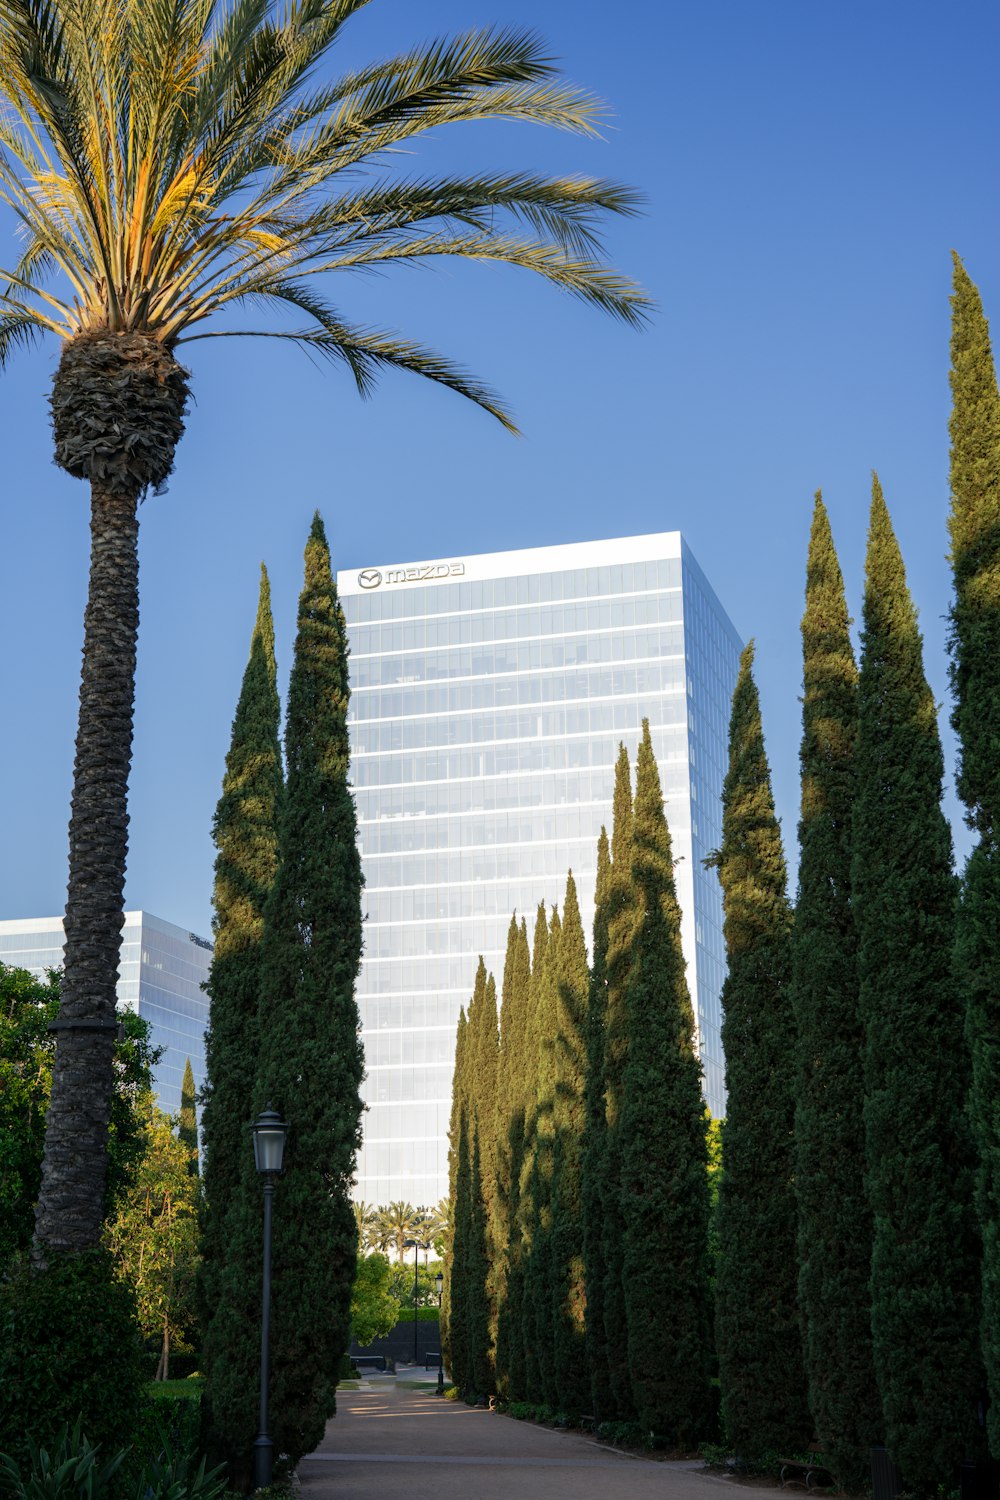 a palm tree in front of a tall building